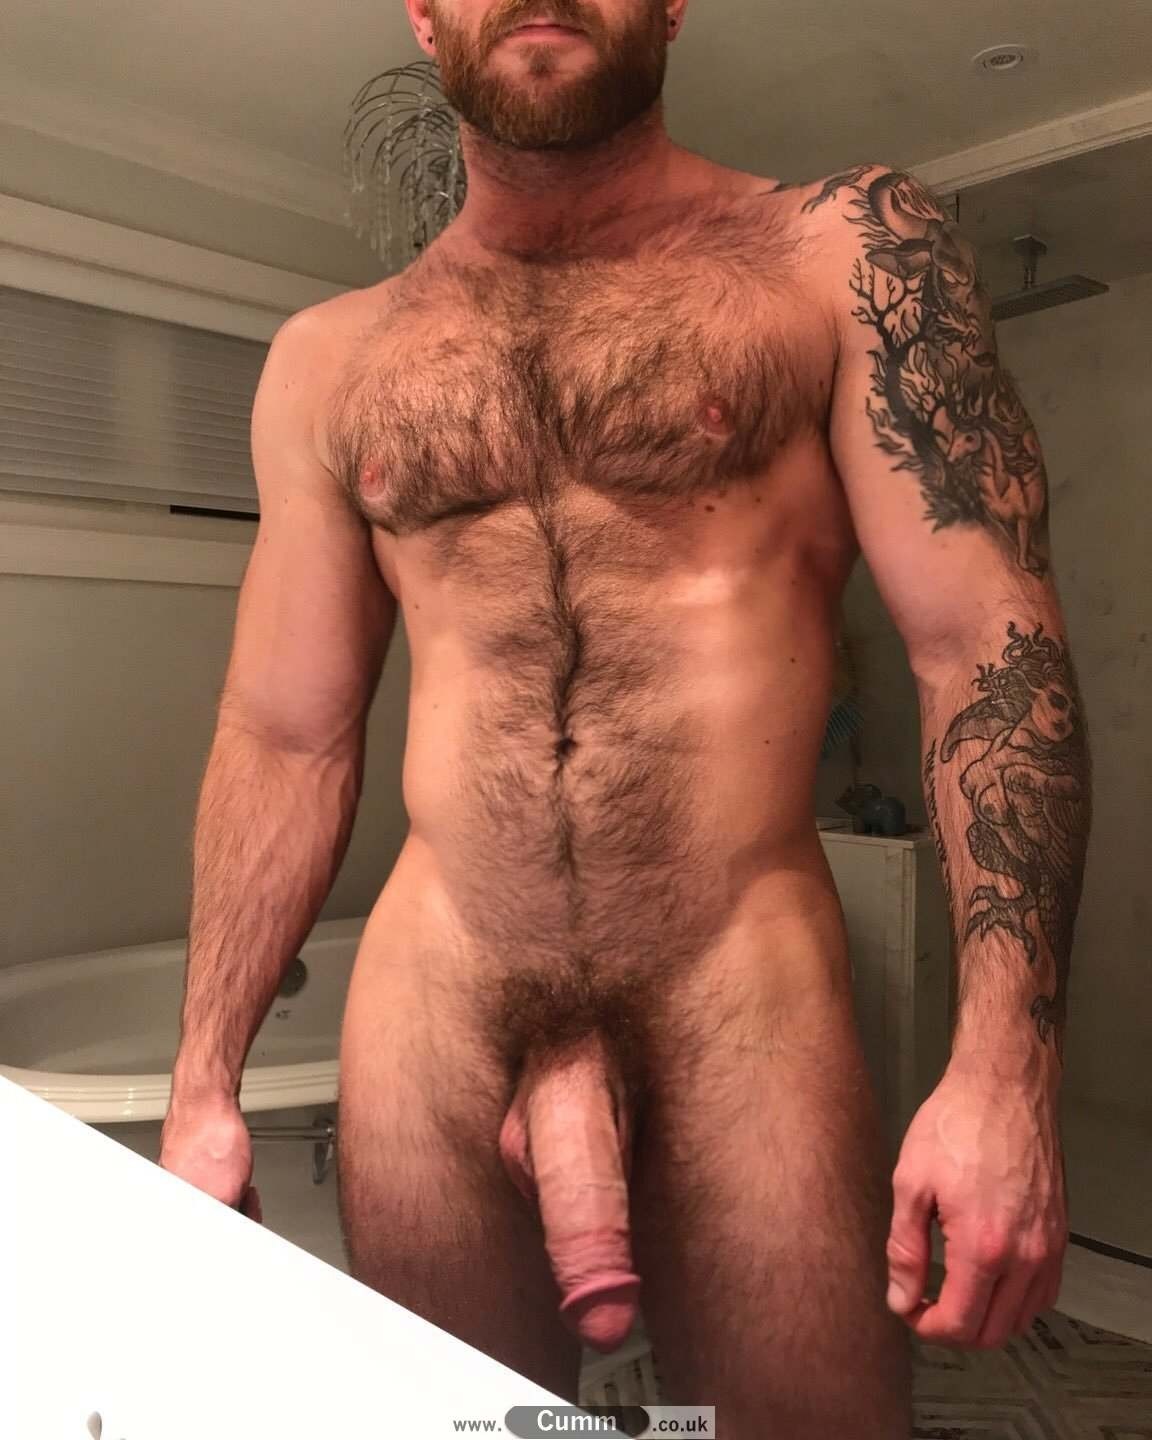 Hairy Big Cock - Naked Guy Shows His Hairy Penis (46 photos) - motherless porn pics